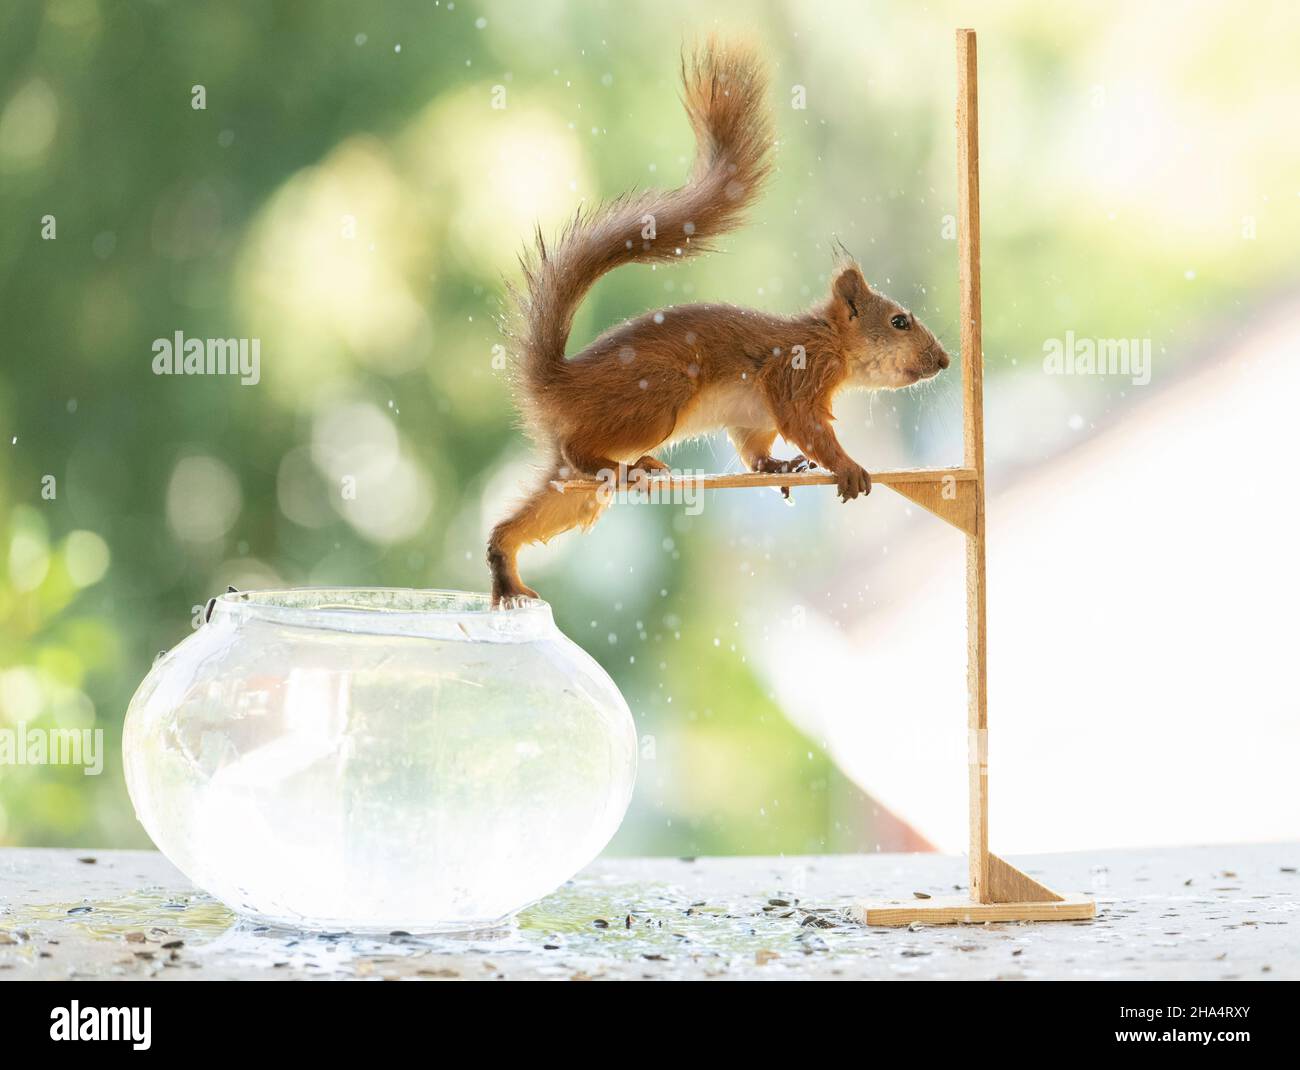 young red squirrel is climbing out an fish bowl Stock Photo